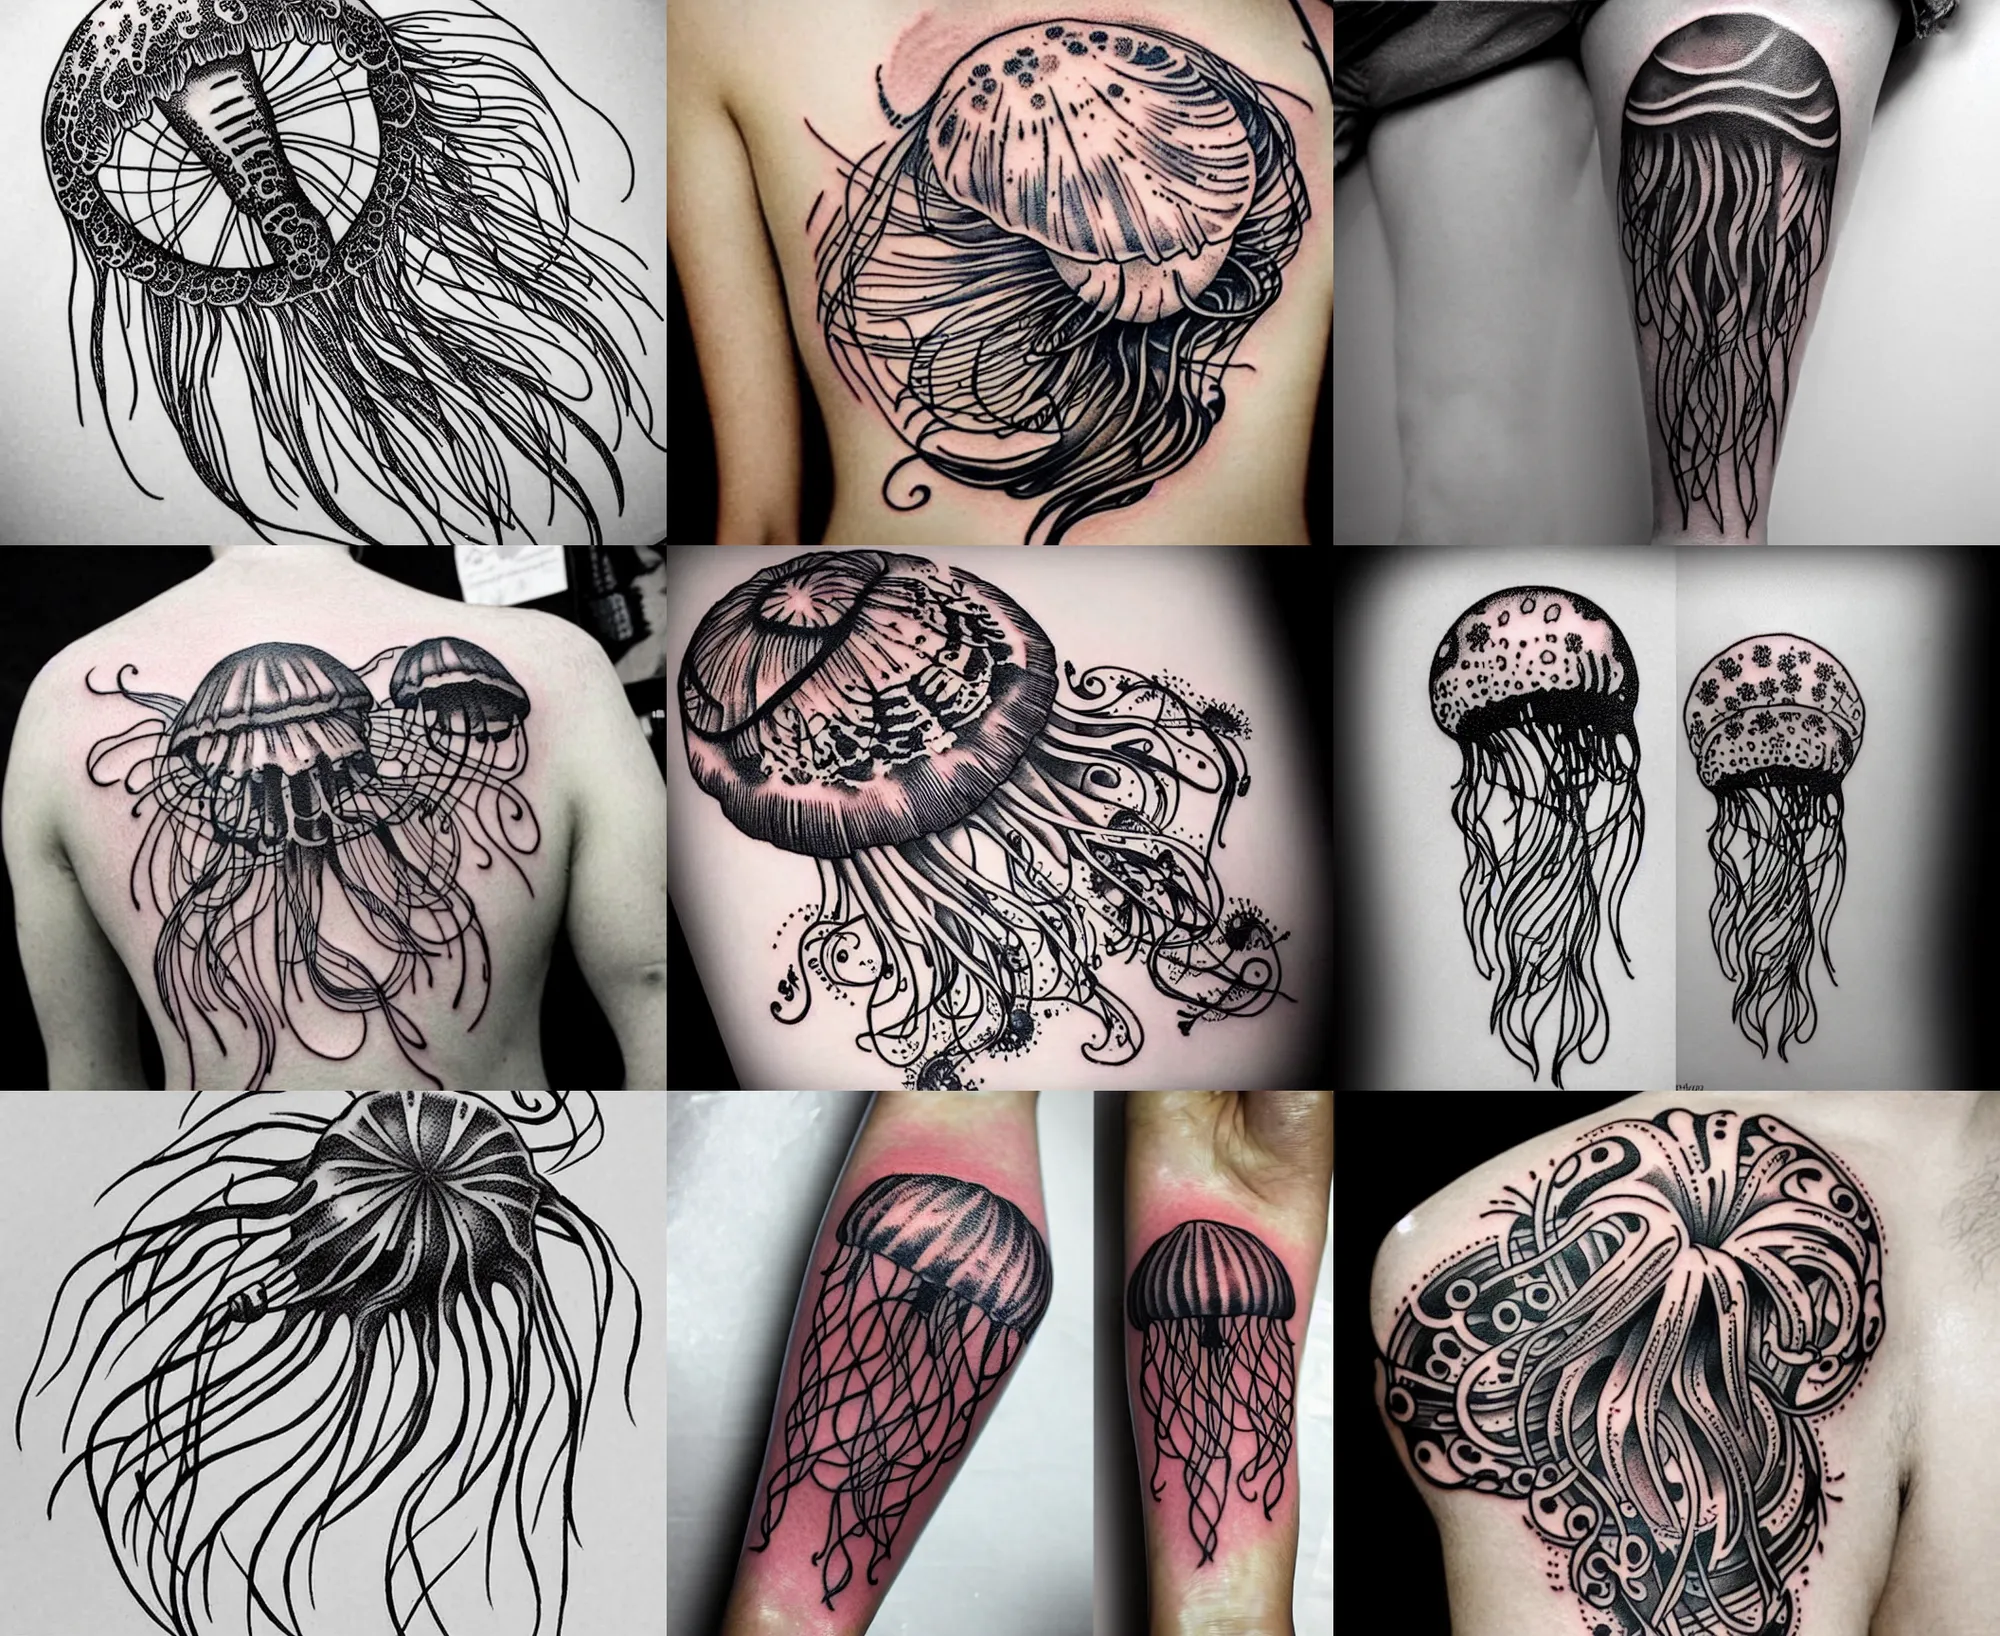 D's Tattoos - Simple jellyfish tattoo. We are working on appointments only  plz call to schedule 361-652-0850. #jellyfishtattoo #eternalink #tattoo  #tattooideas | Facebook